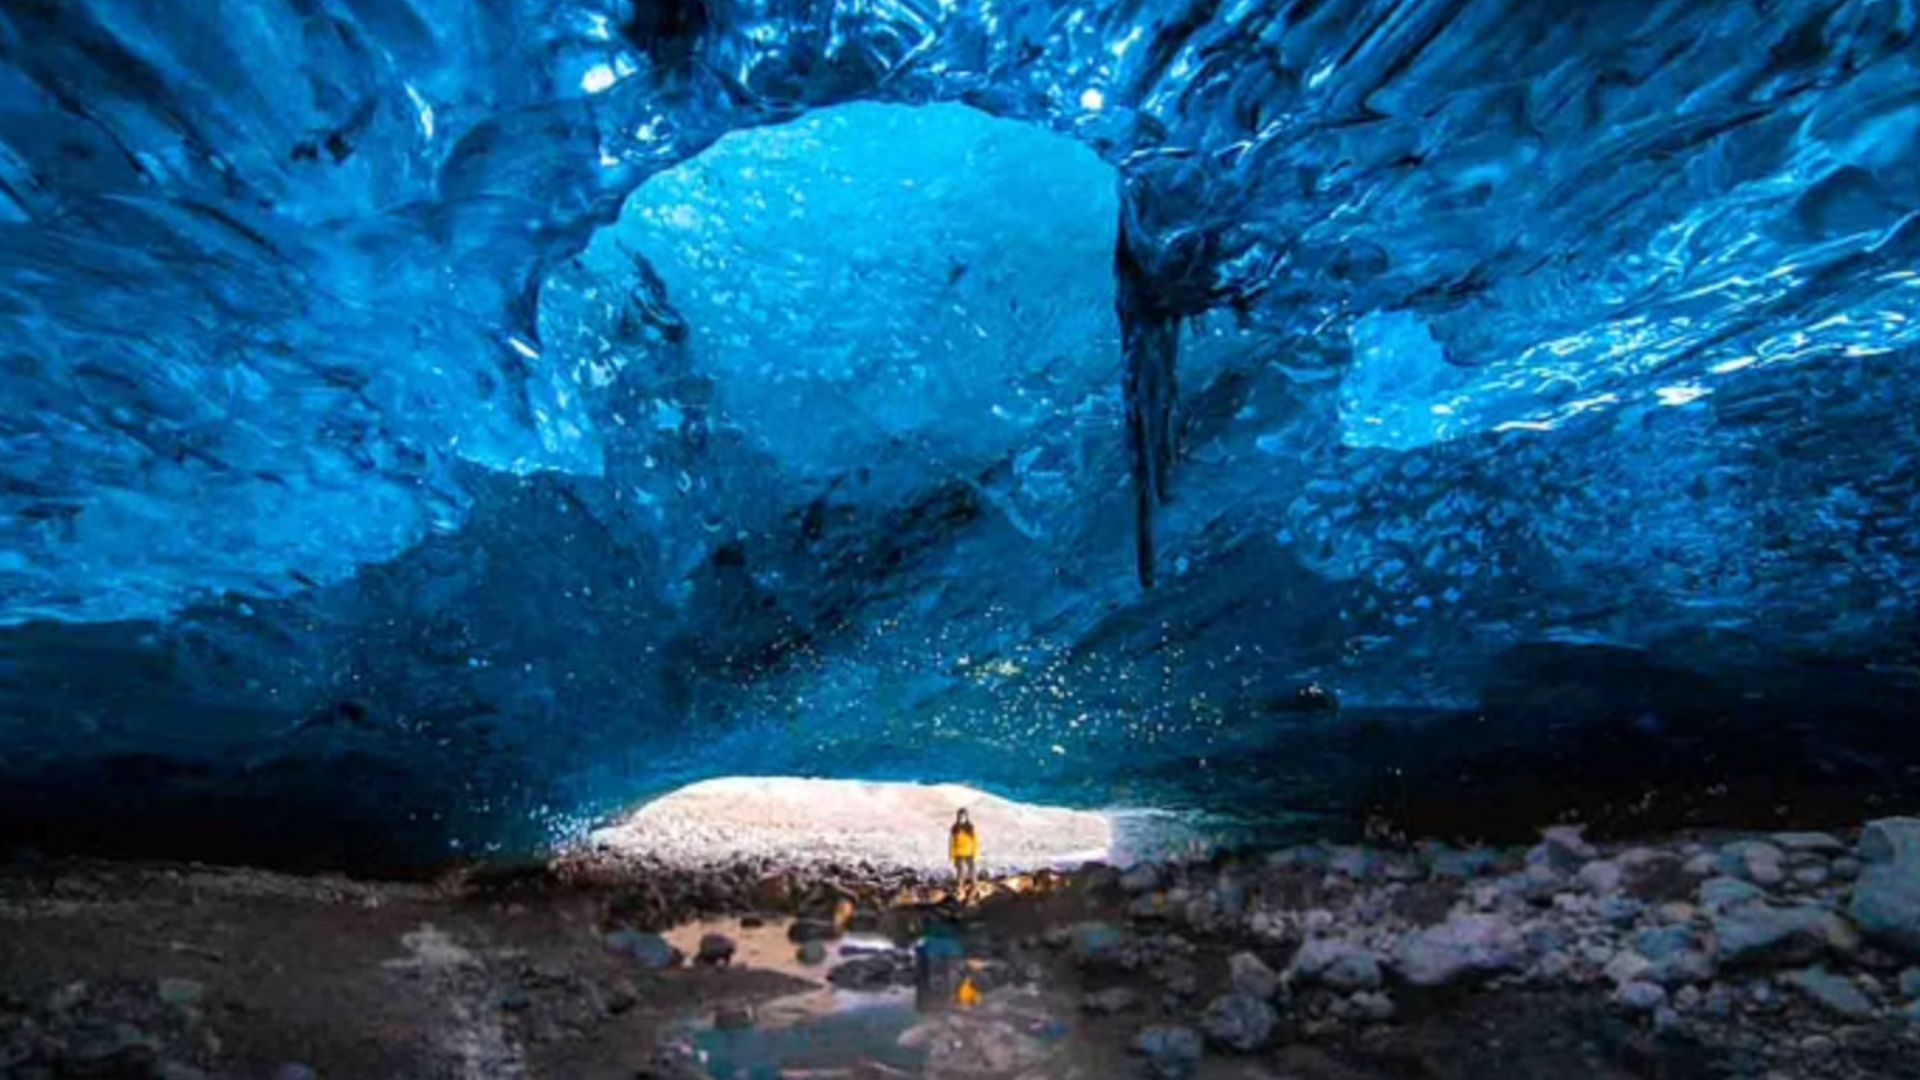 A man alone in the ice cave in Iceland